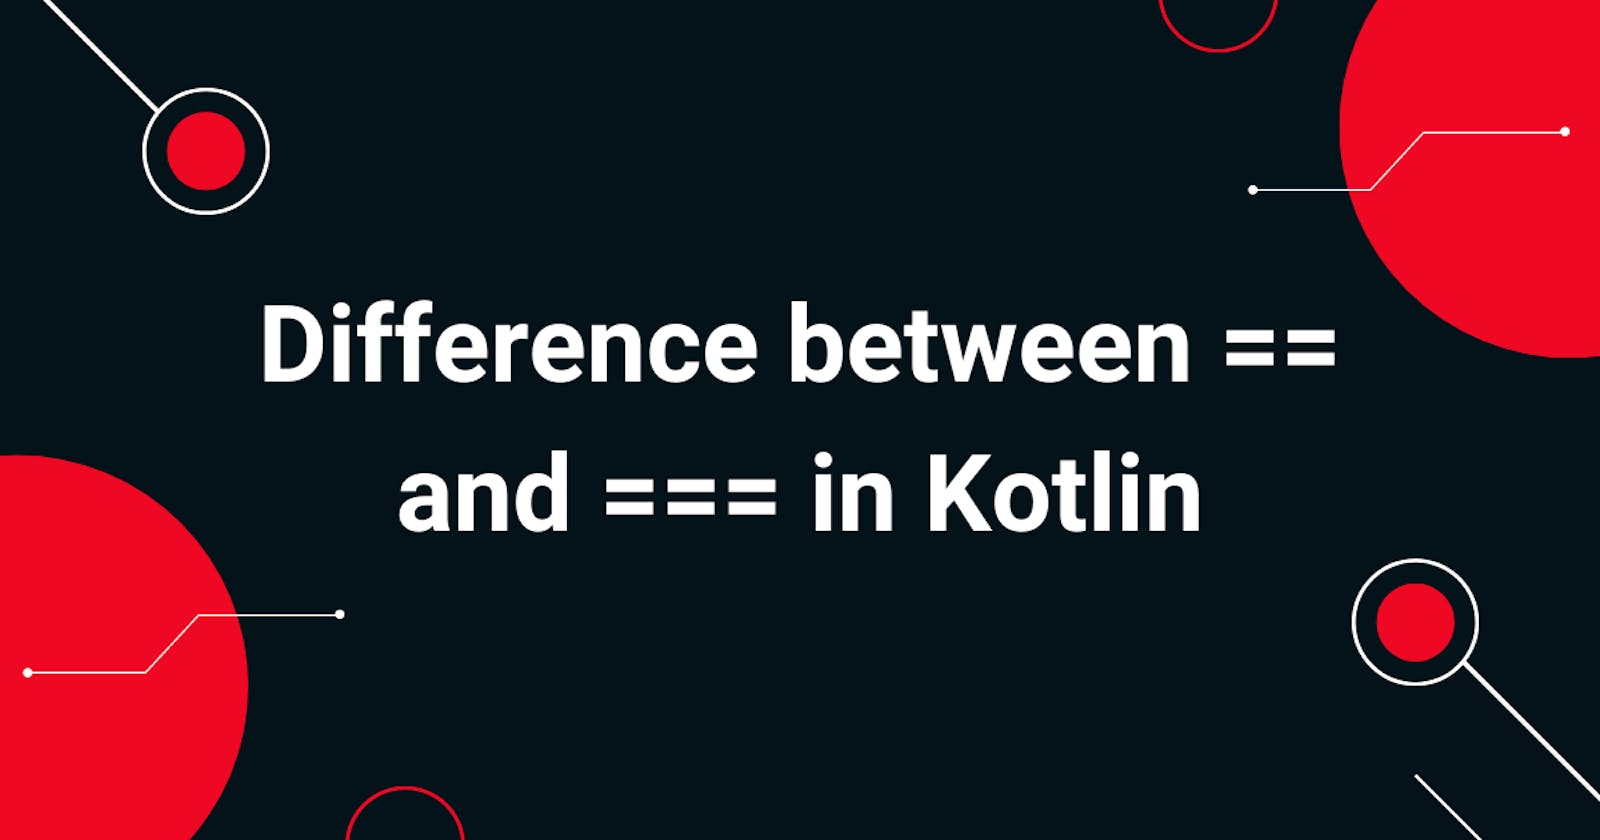 Difference between == and === in Kotlin